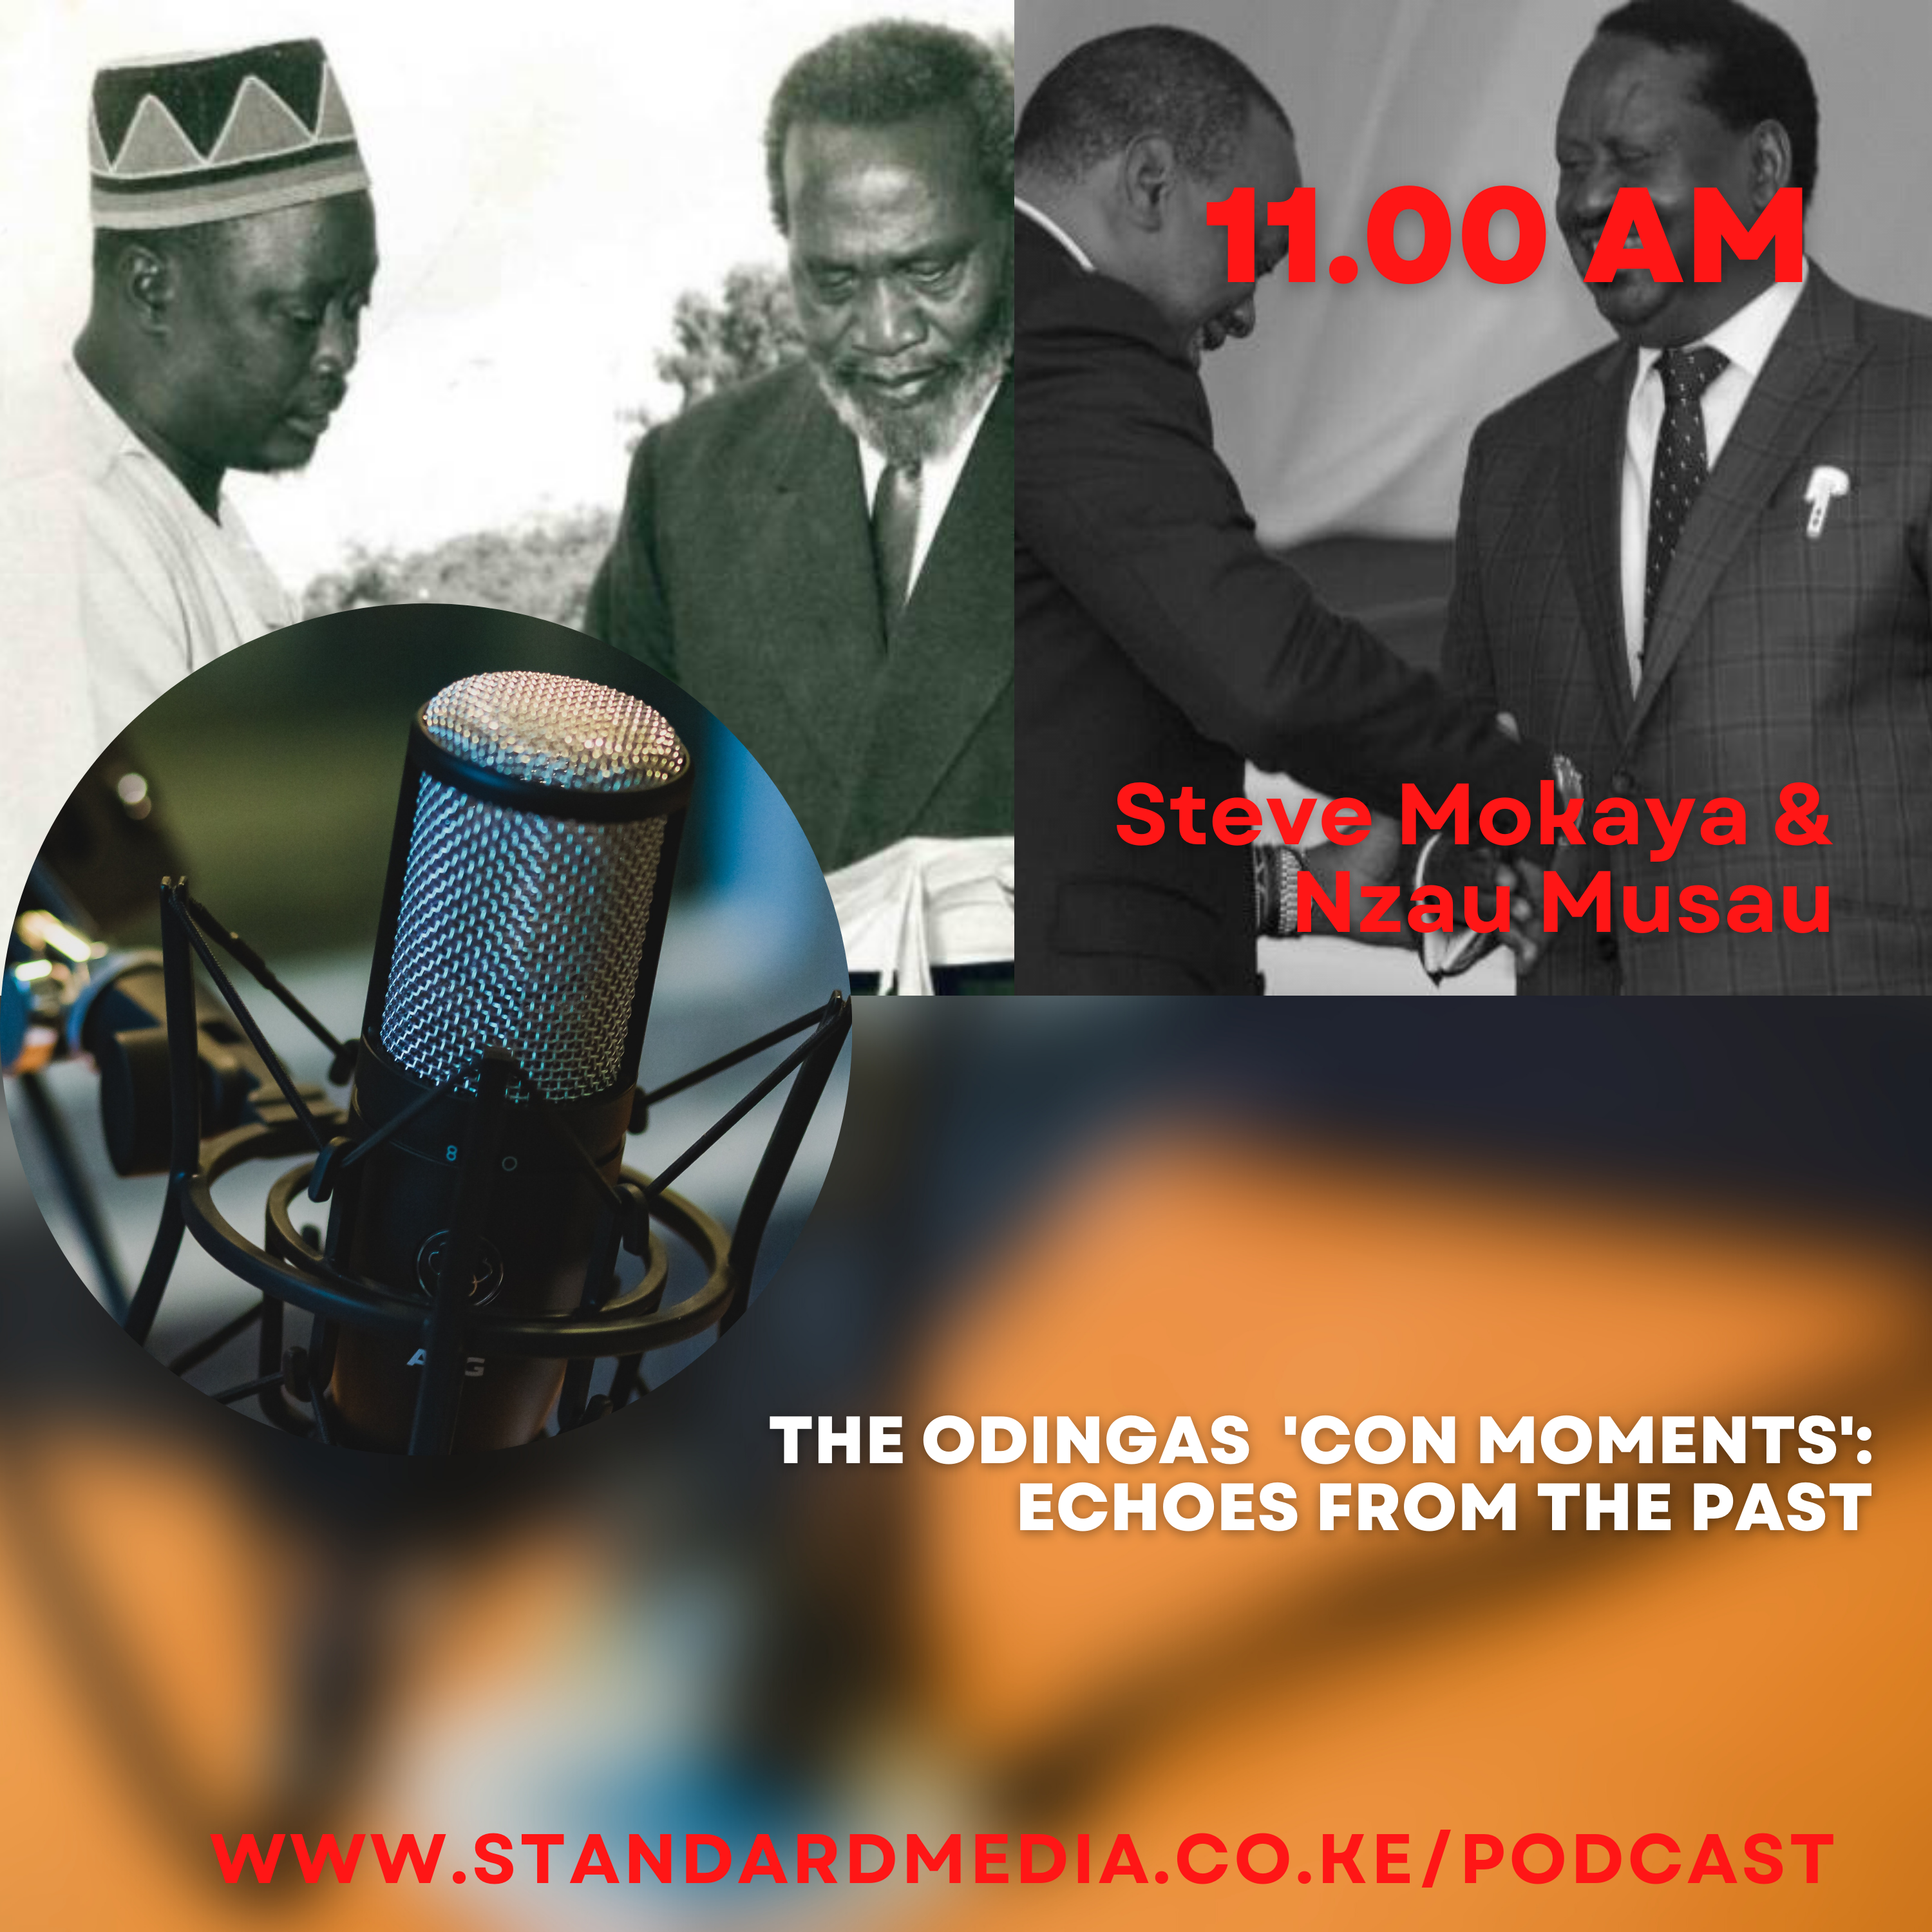 The Odingas 'con moments': Echoes from the past podcast